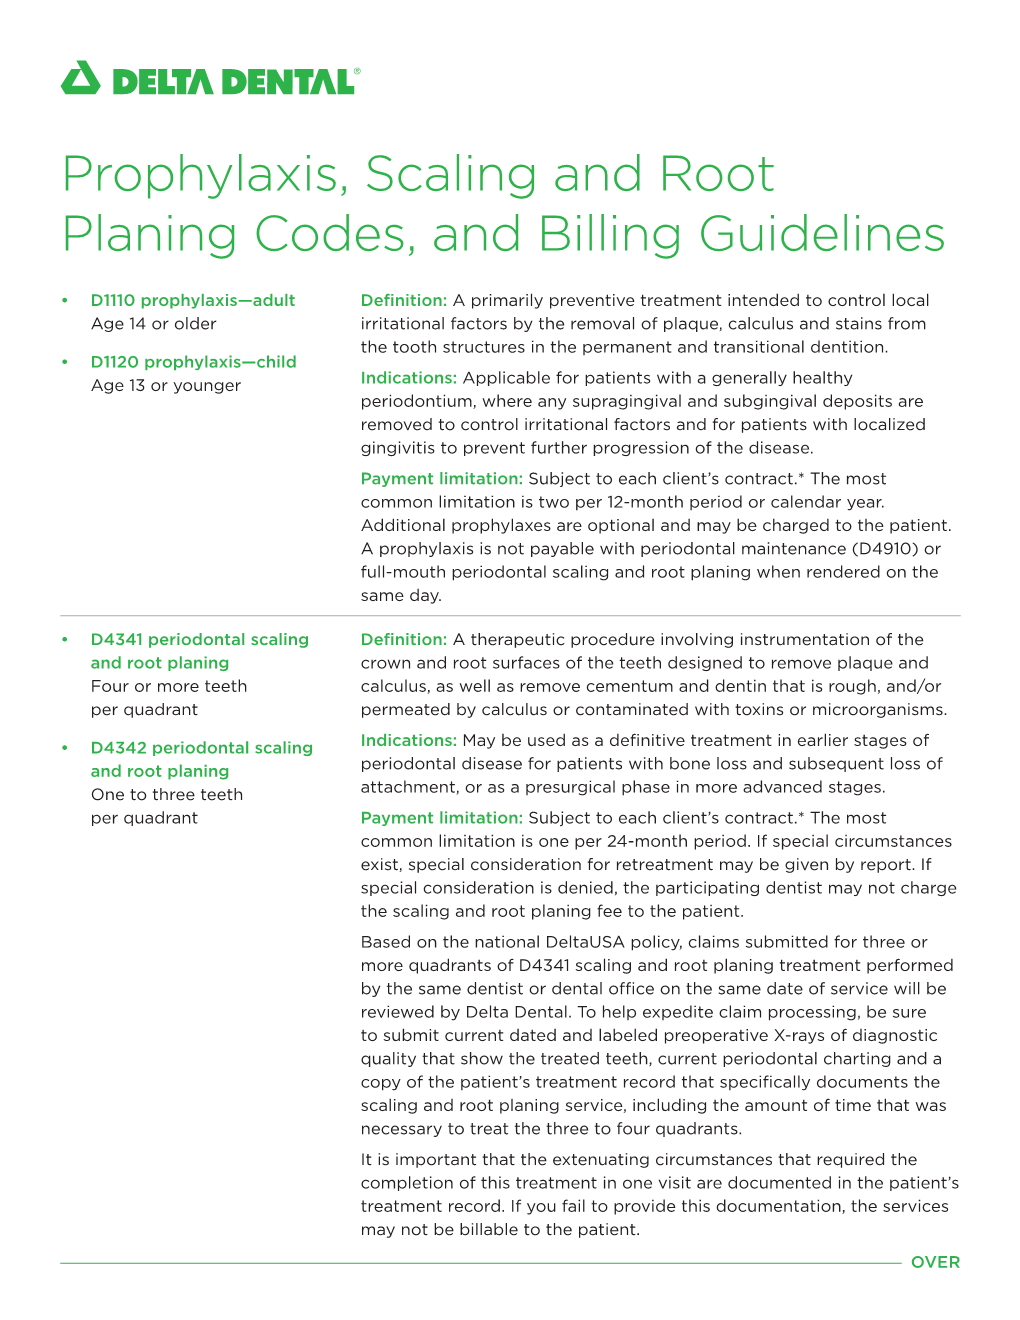 Prophylaxis and Root Planing Codes and Billing